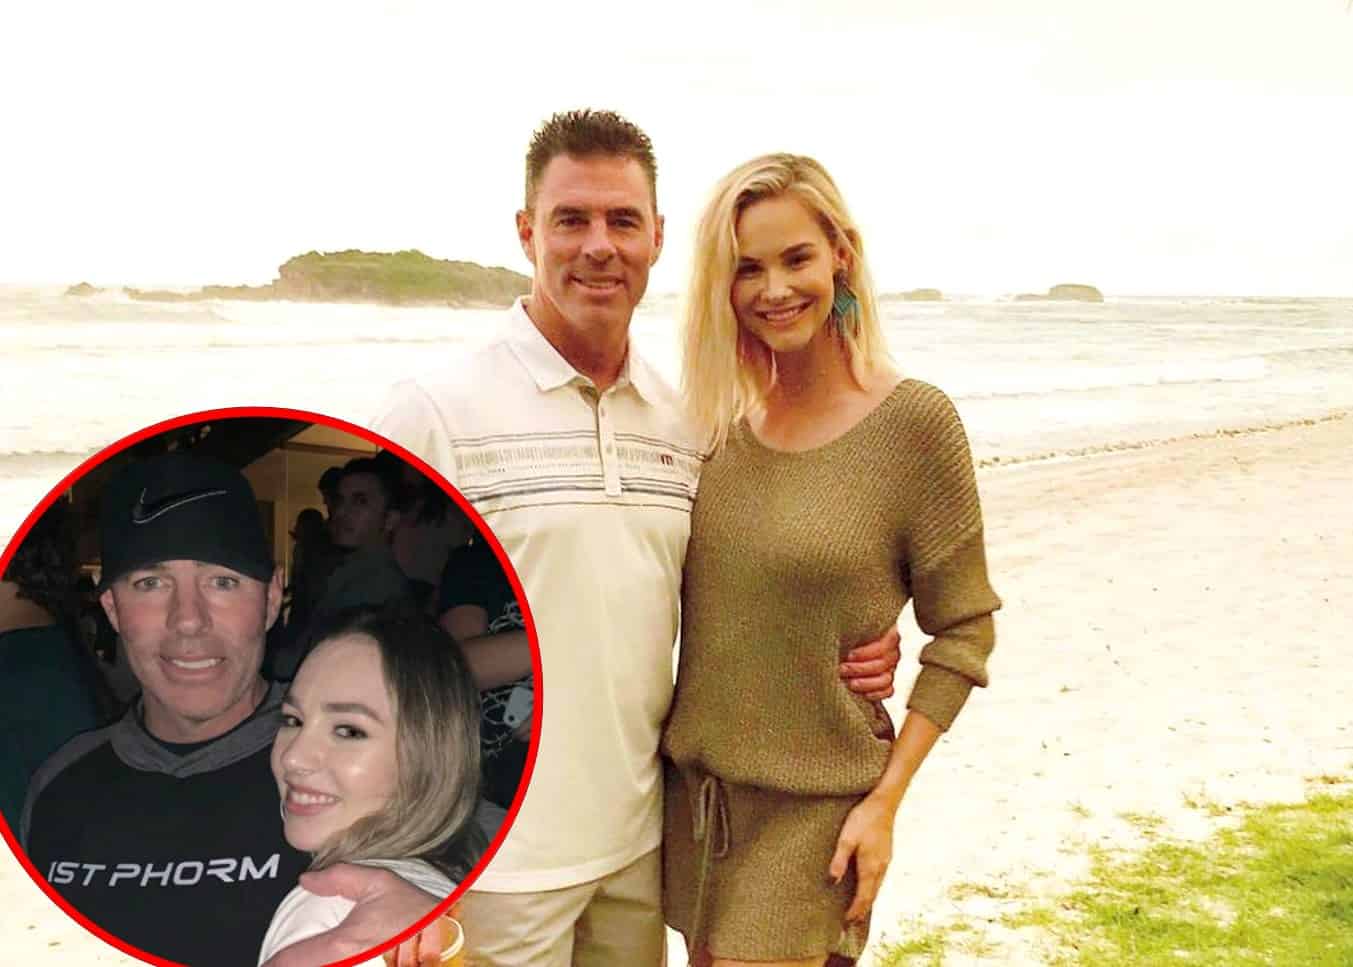 RHOC's Jim Edmonds Slams Claims He Attended Concert with Nanny